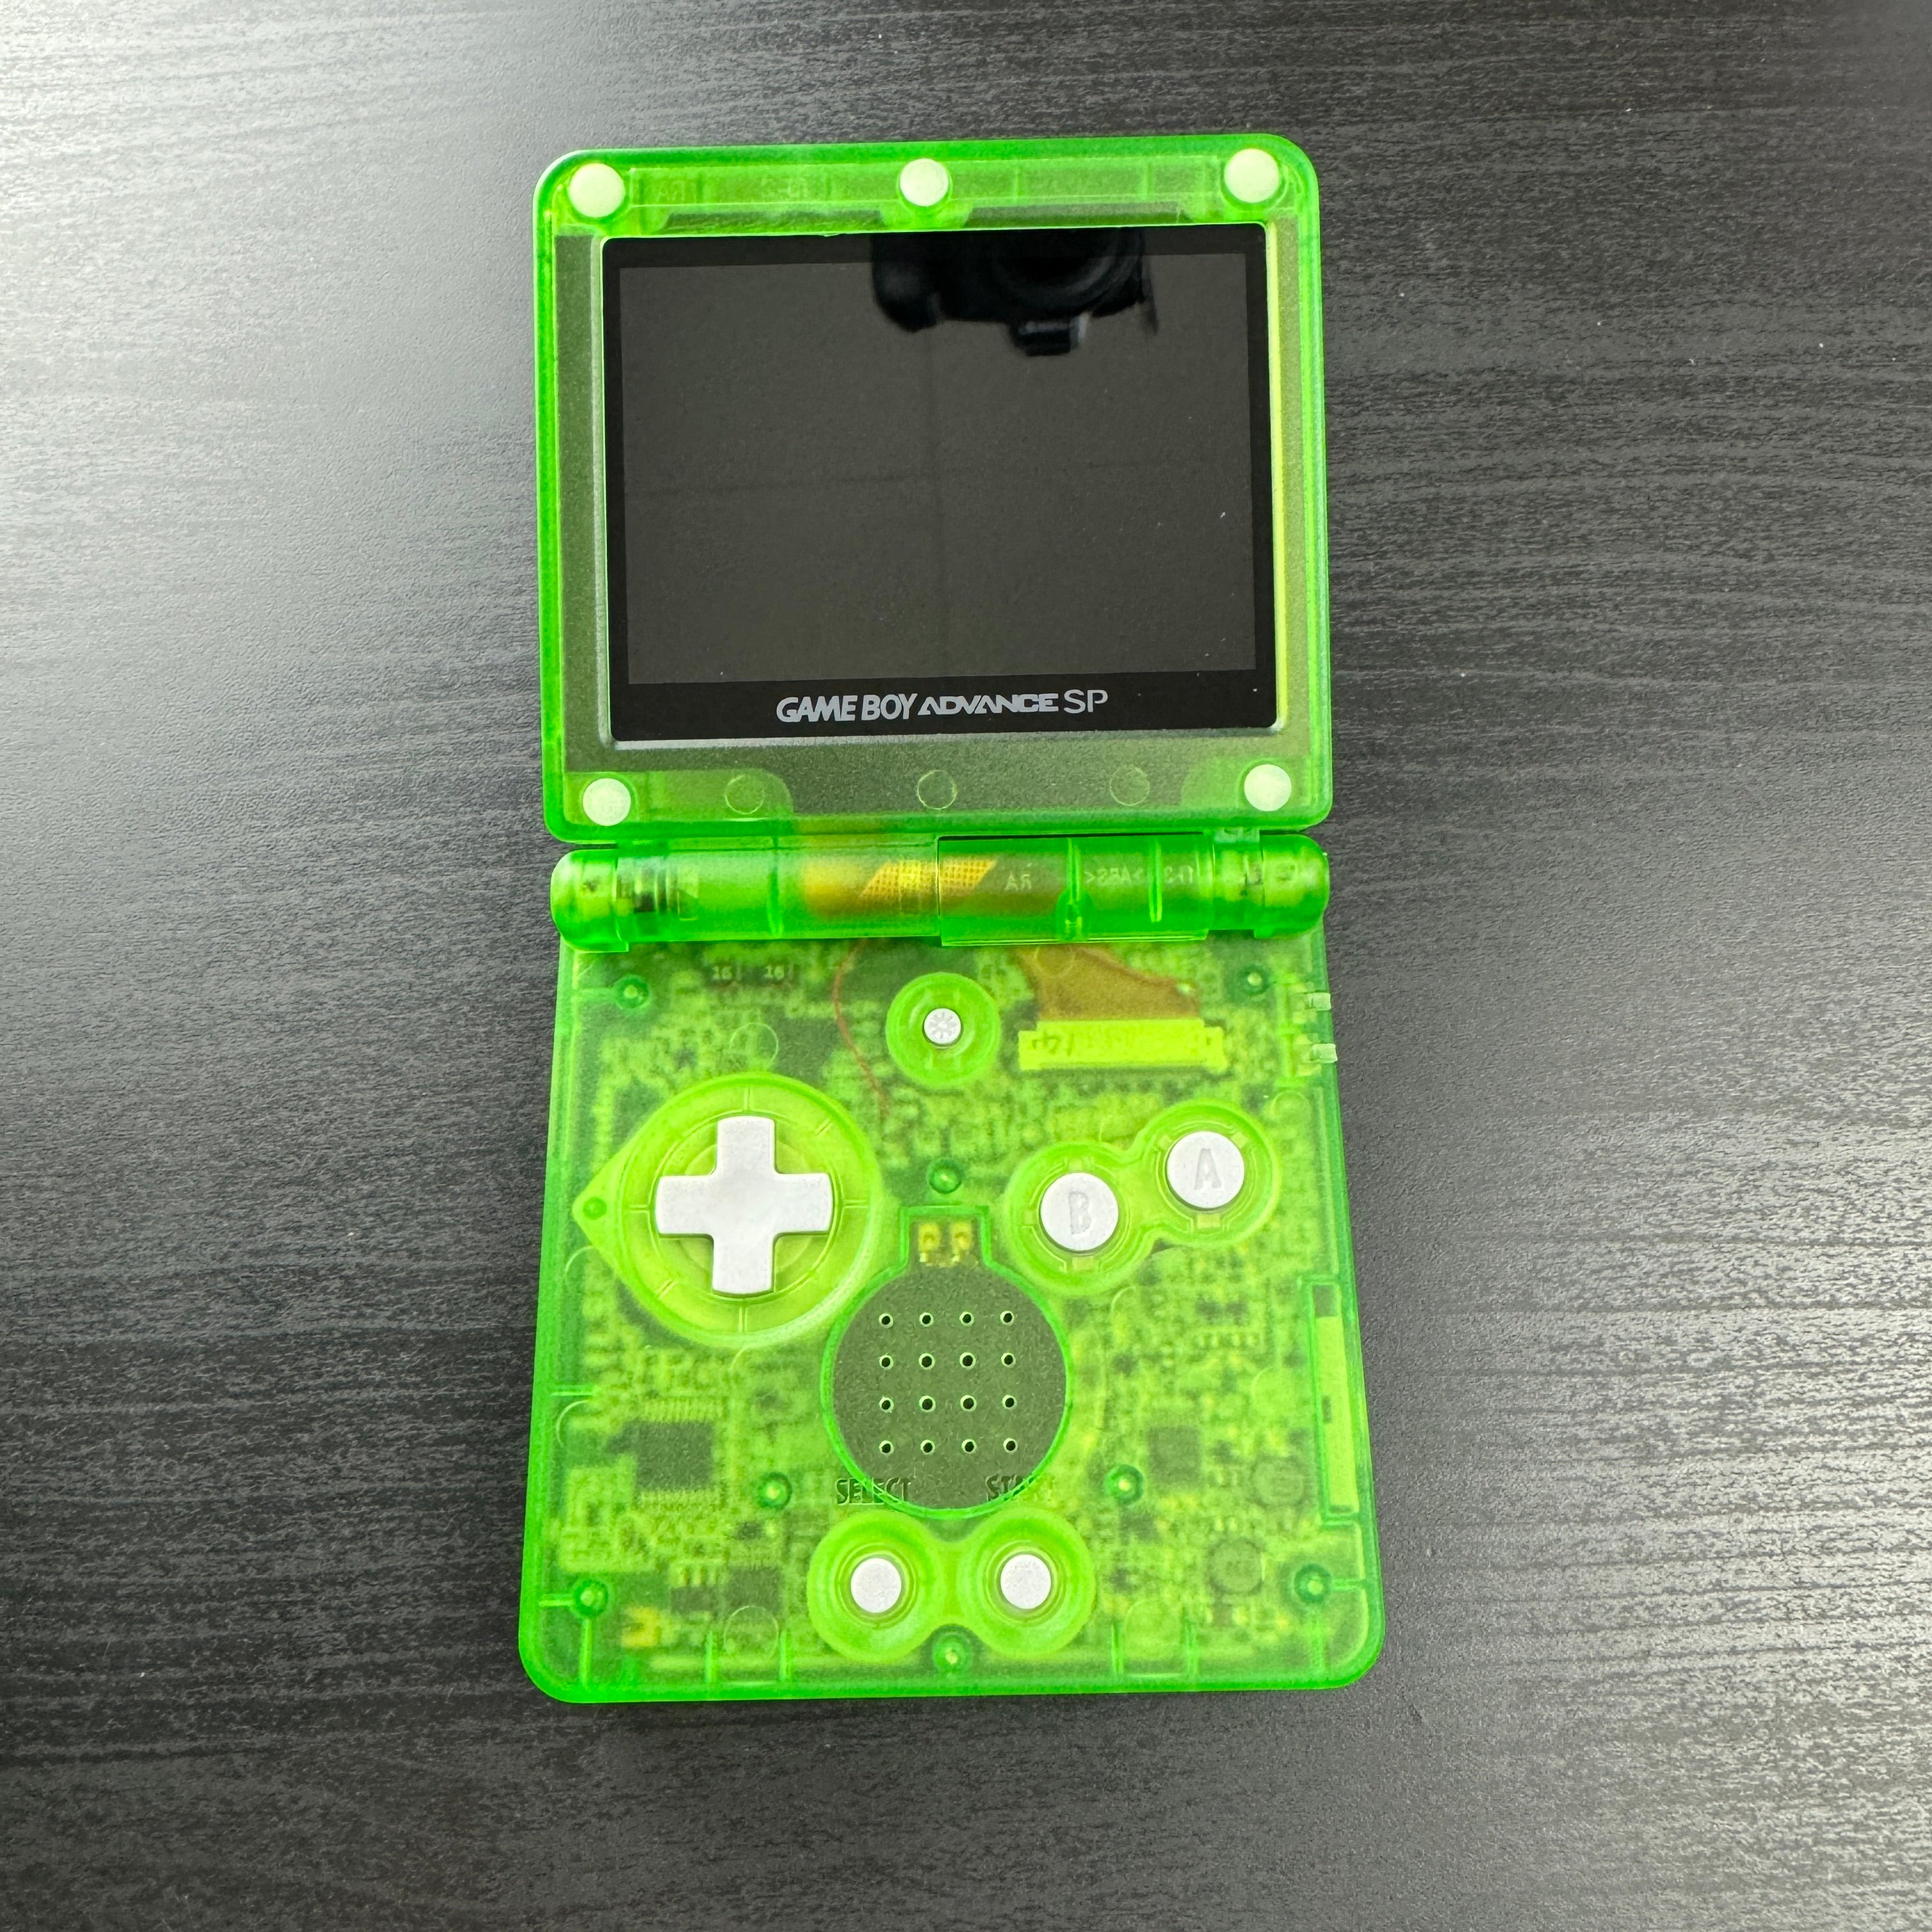 Modded Game Boy Advance SP W/ IPS V2 Screen (Clear Green)